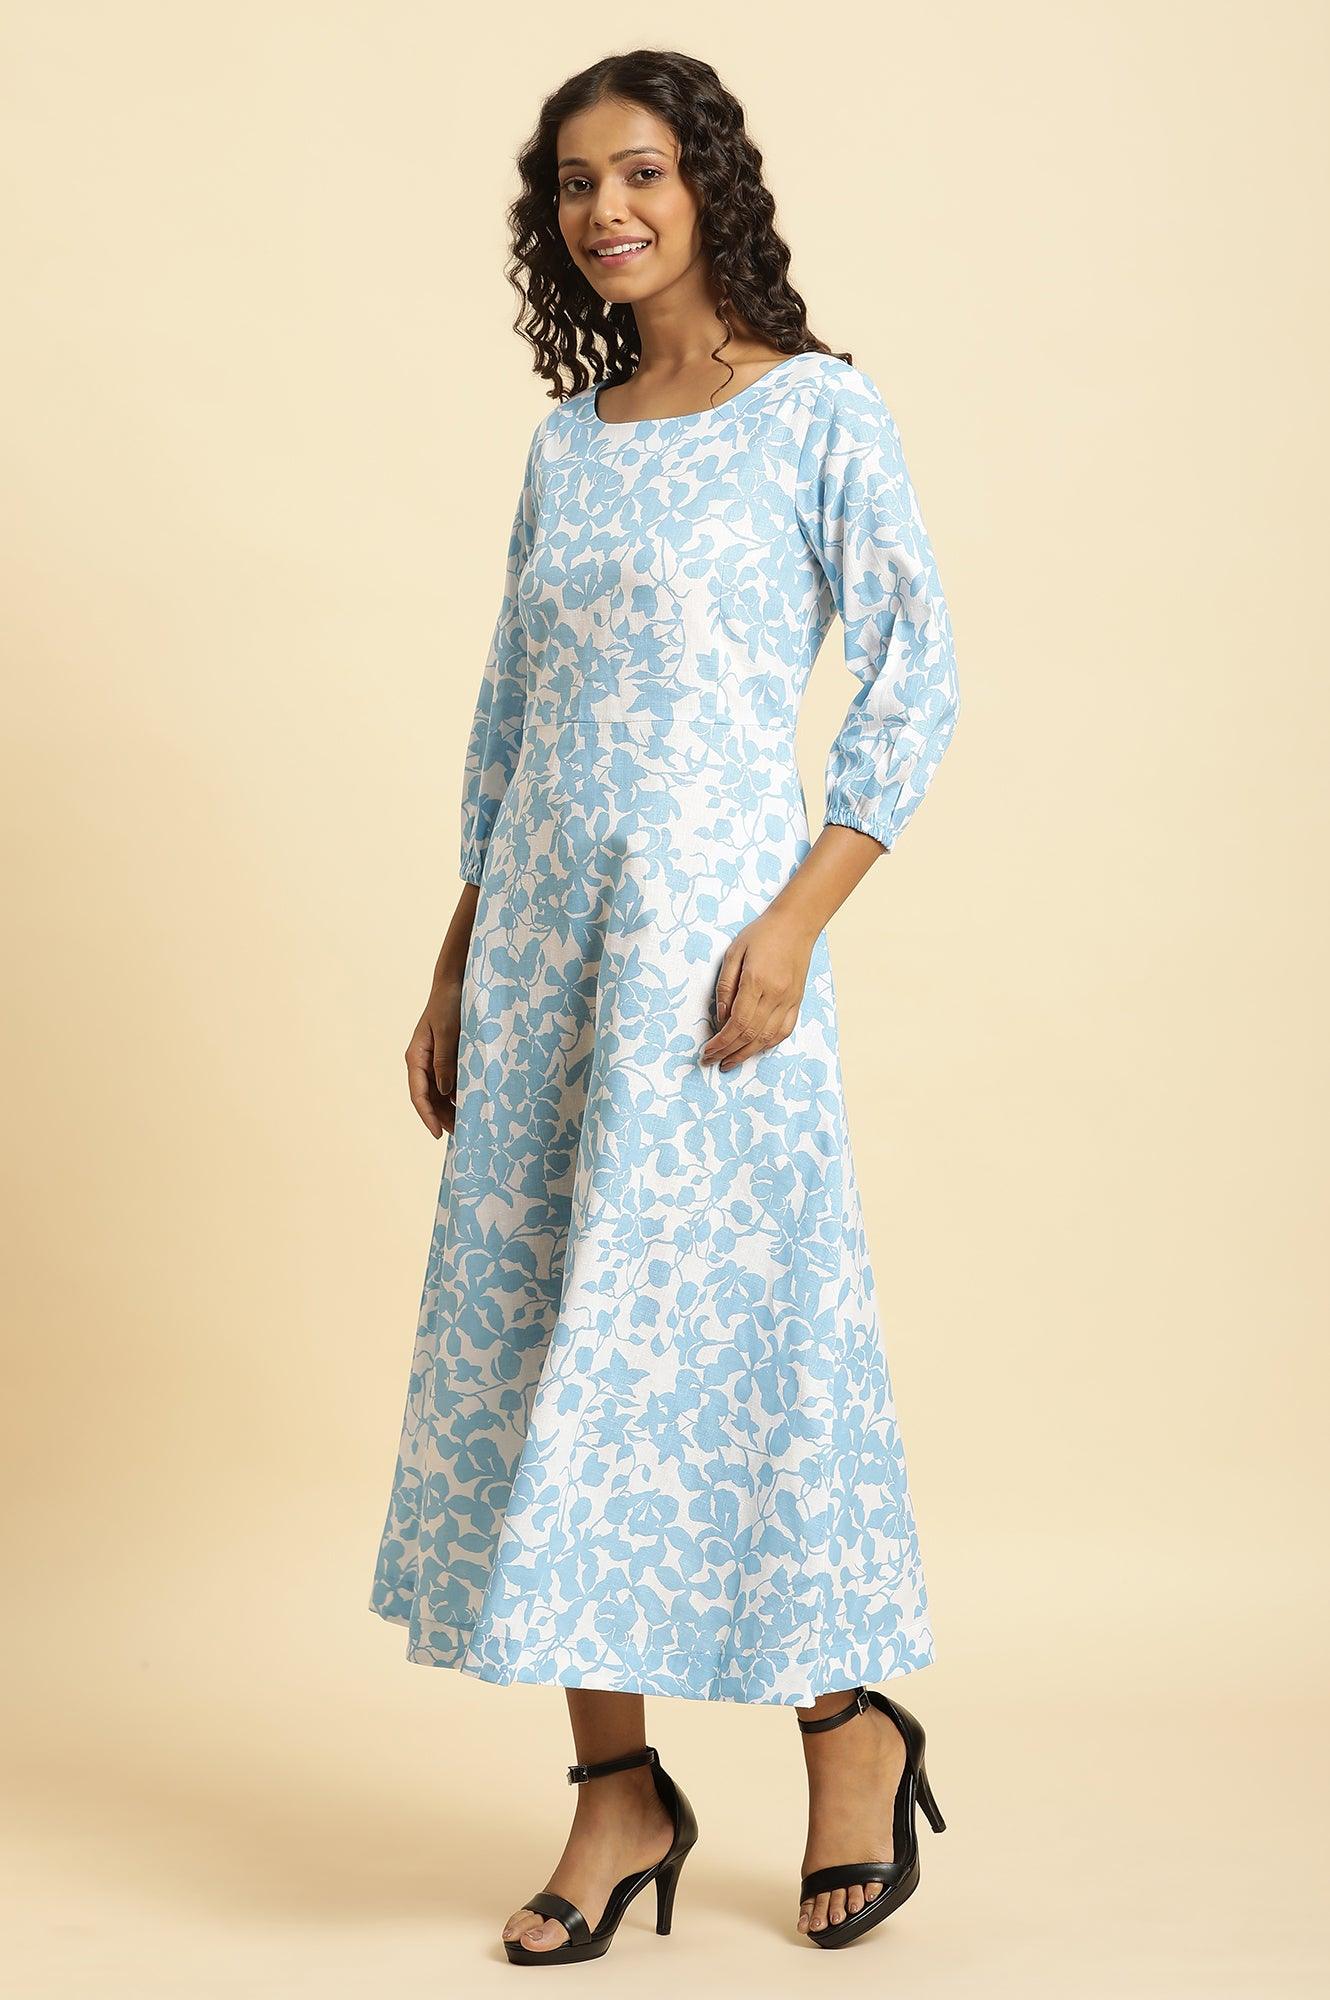 White And Blue Floral Printed Flared Long Dress - wforwoman